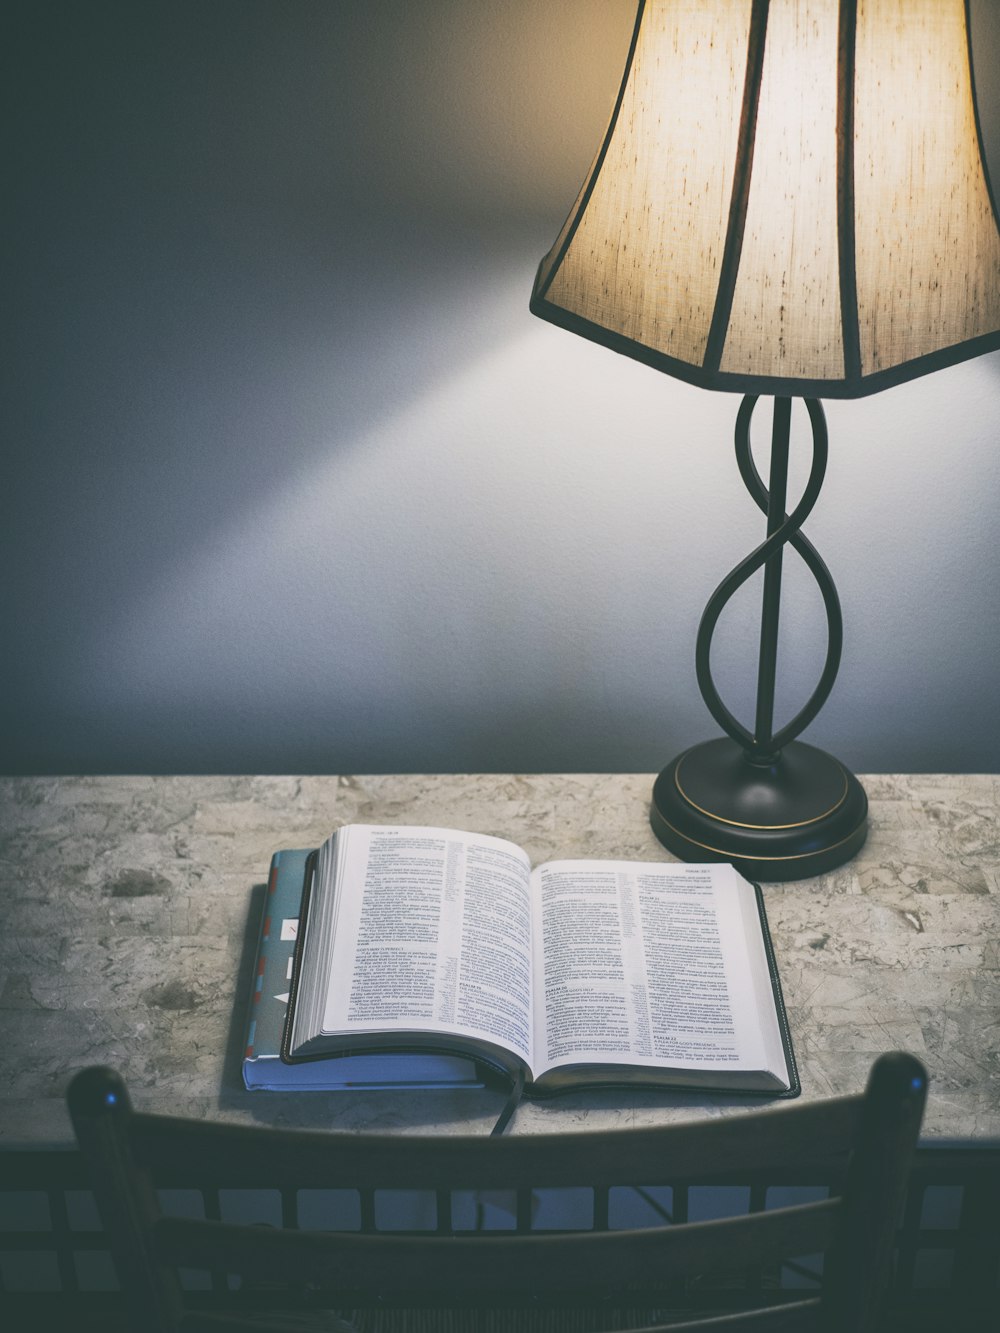 book beside the table lamp photo – Free Bible Image on Unsplash